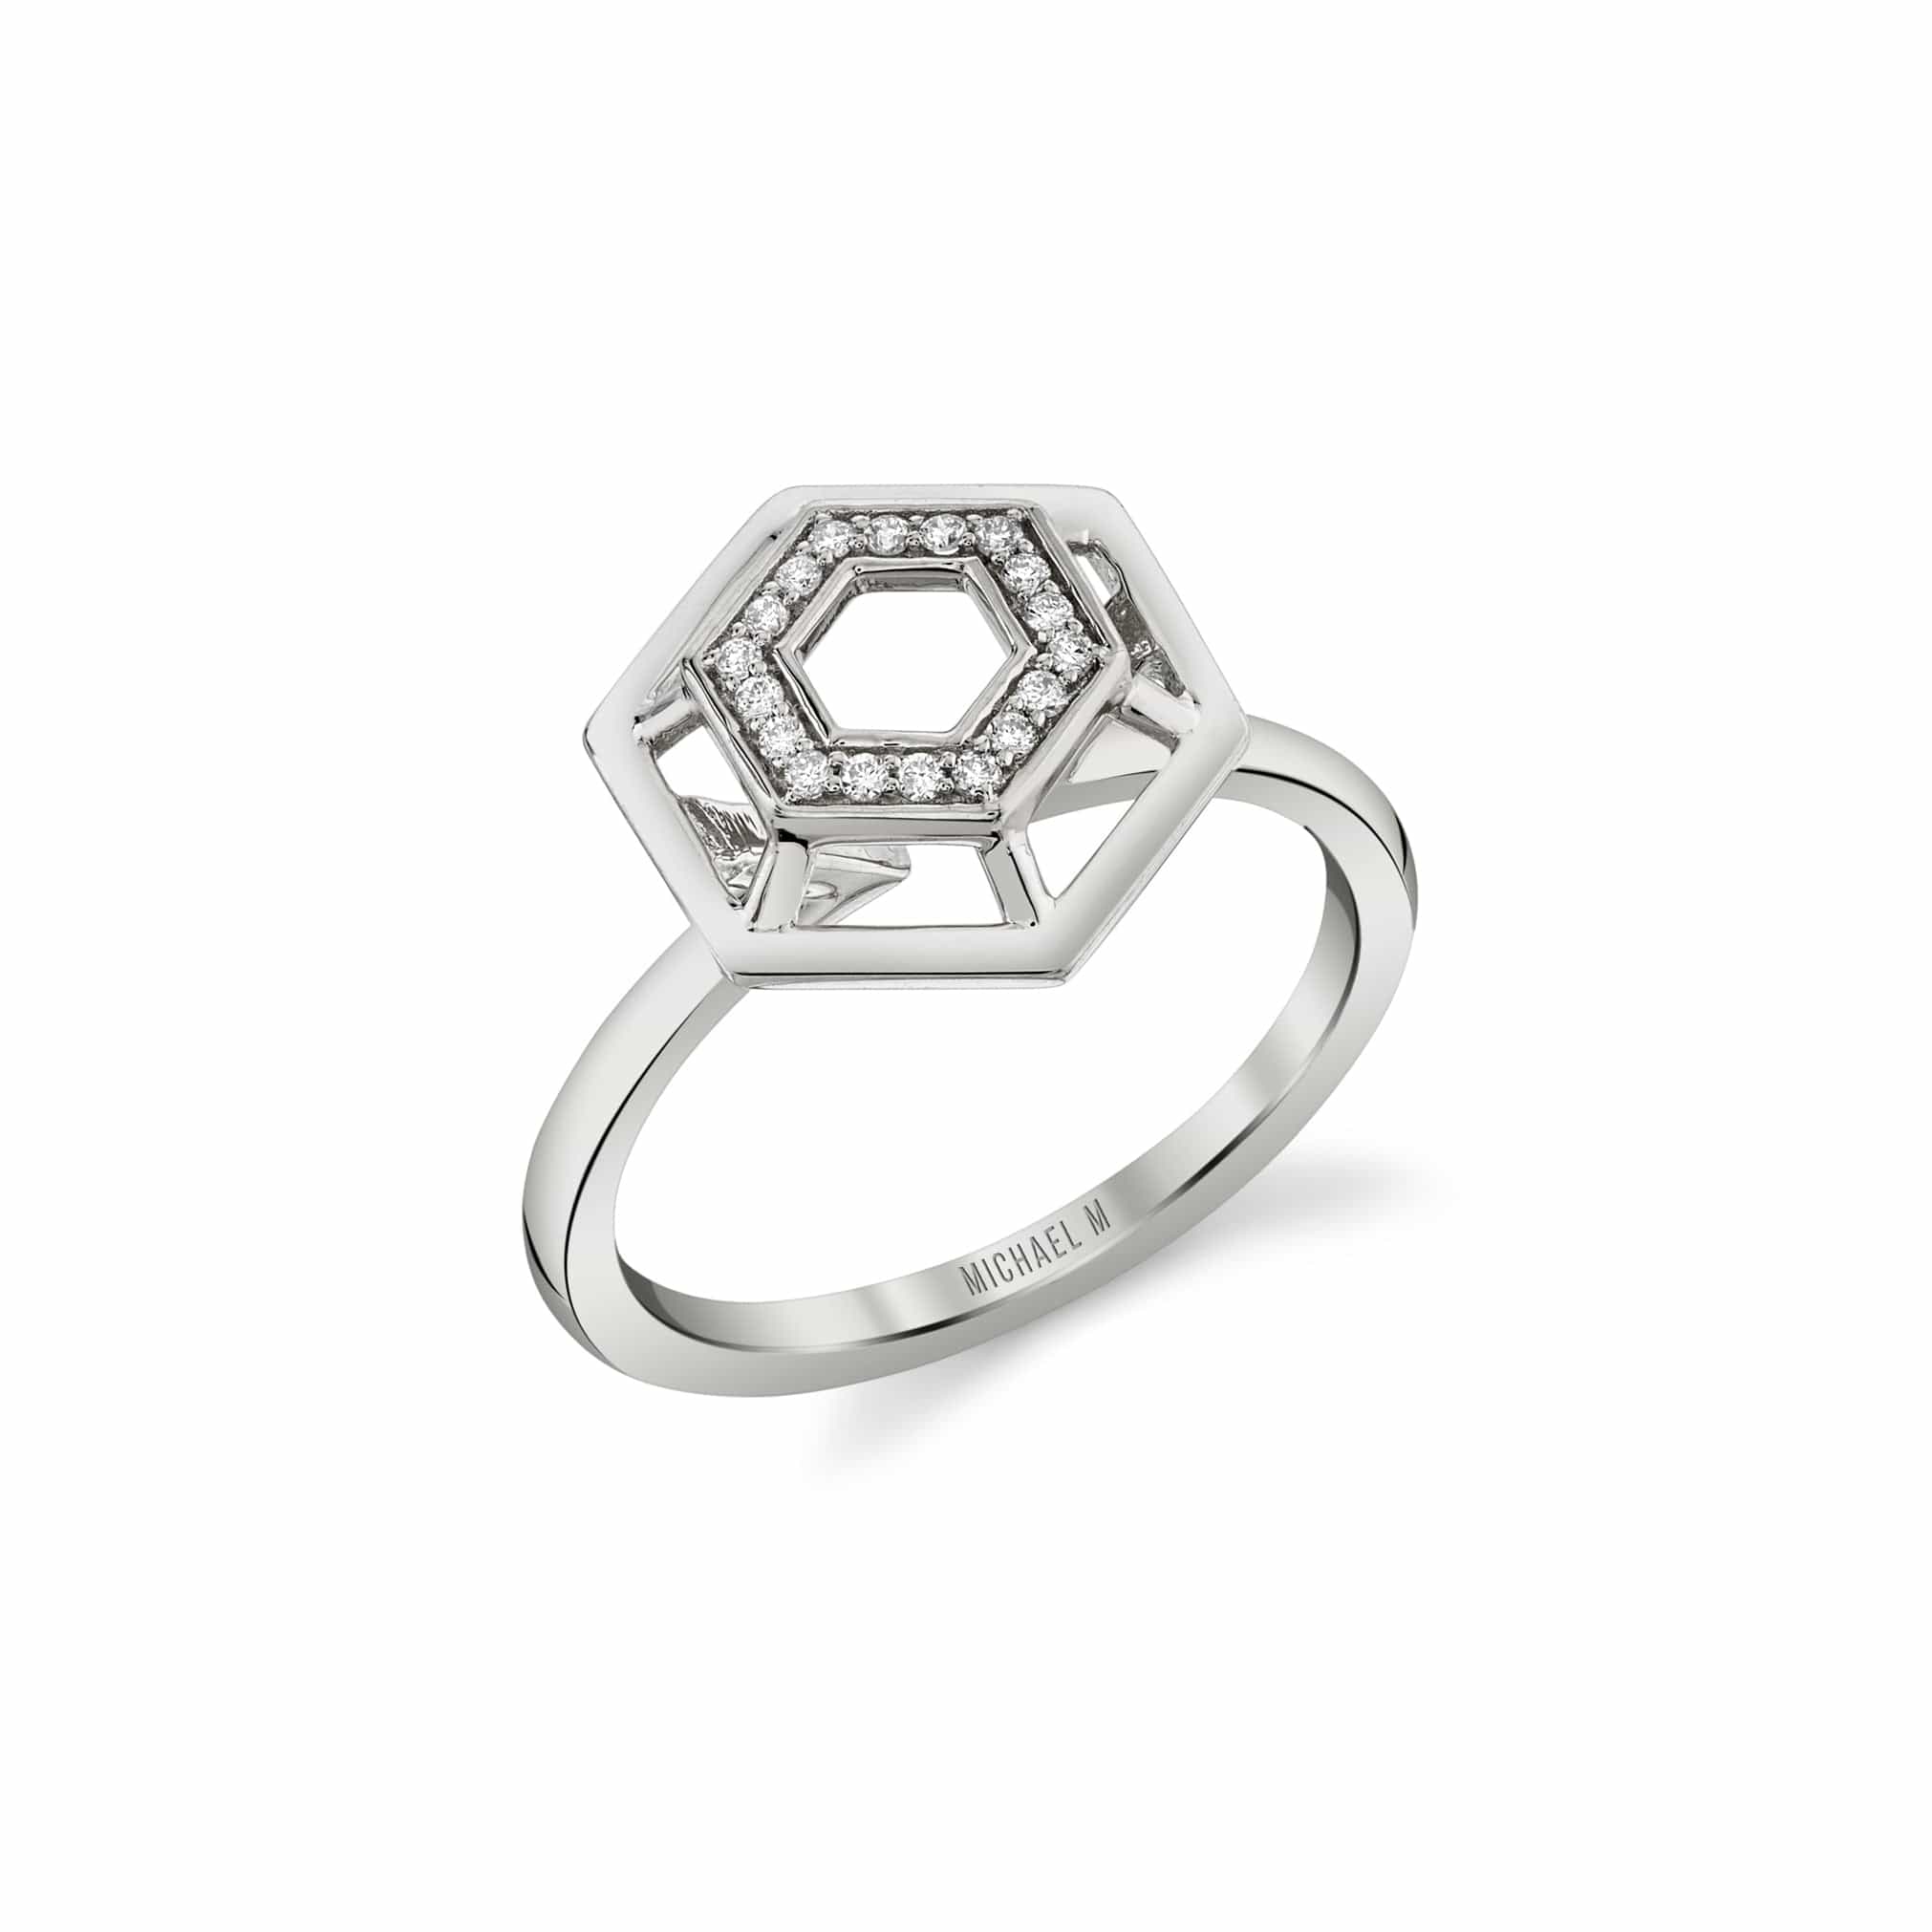 MICHAEL M Fashion Rings 14K White Gold / 4 Hex Truss Cocktail Ring F513